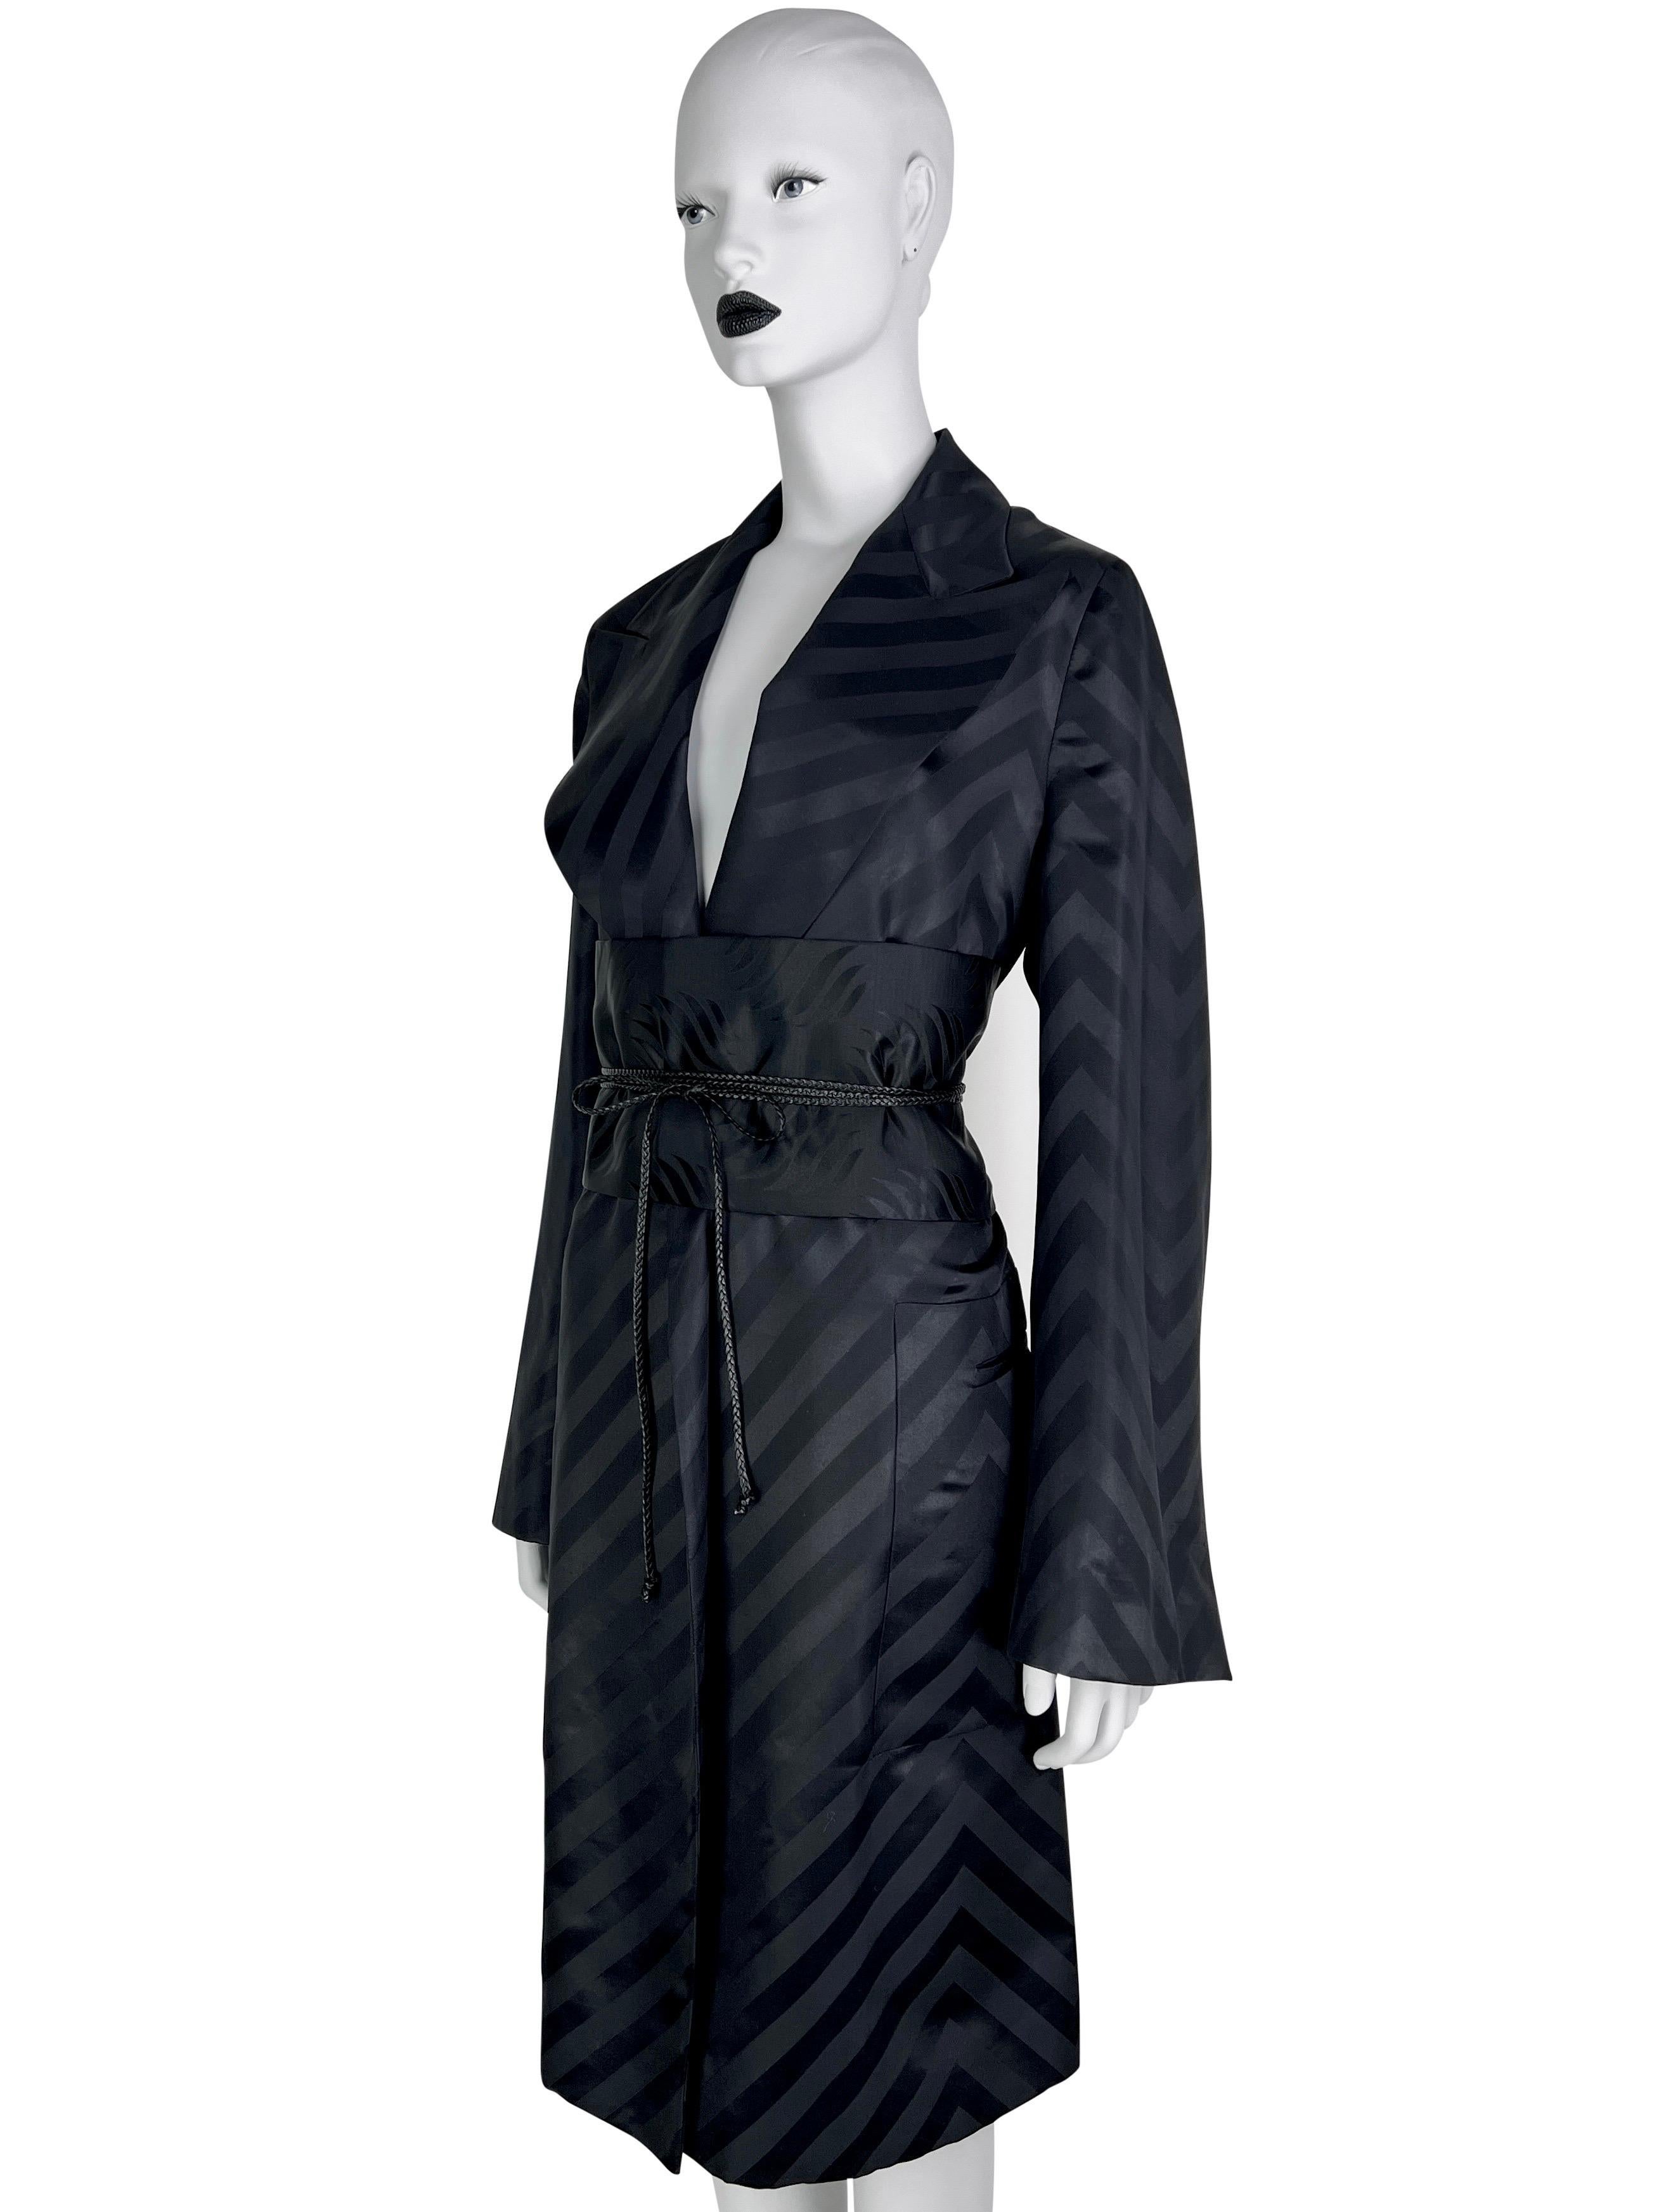 Gucci by Tom Ford Fall 2002 Kimono and Belt Runway Look For Sale 5